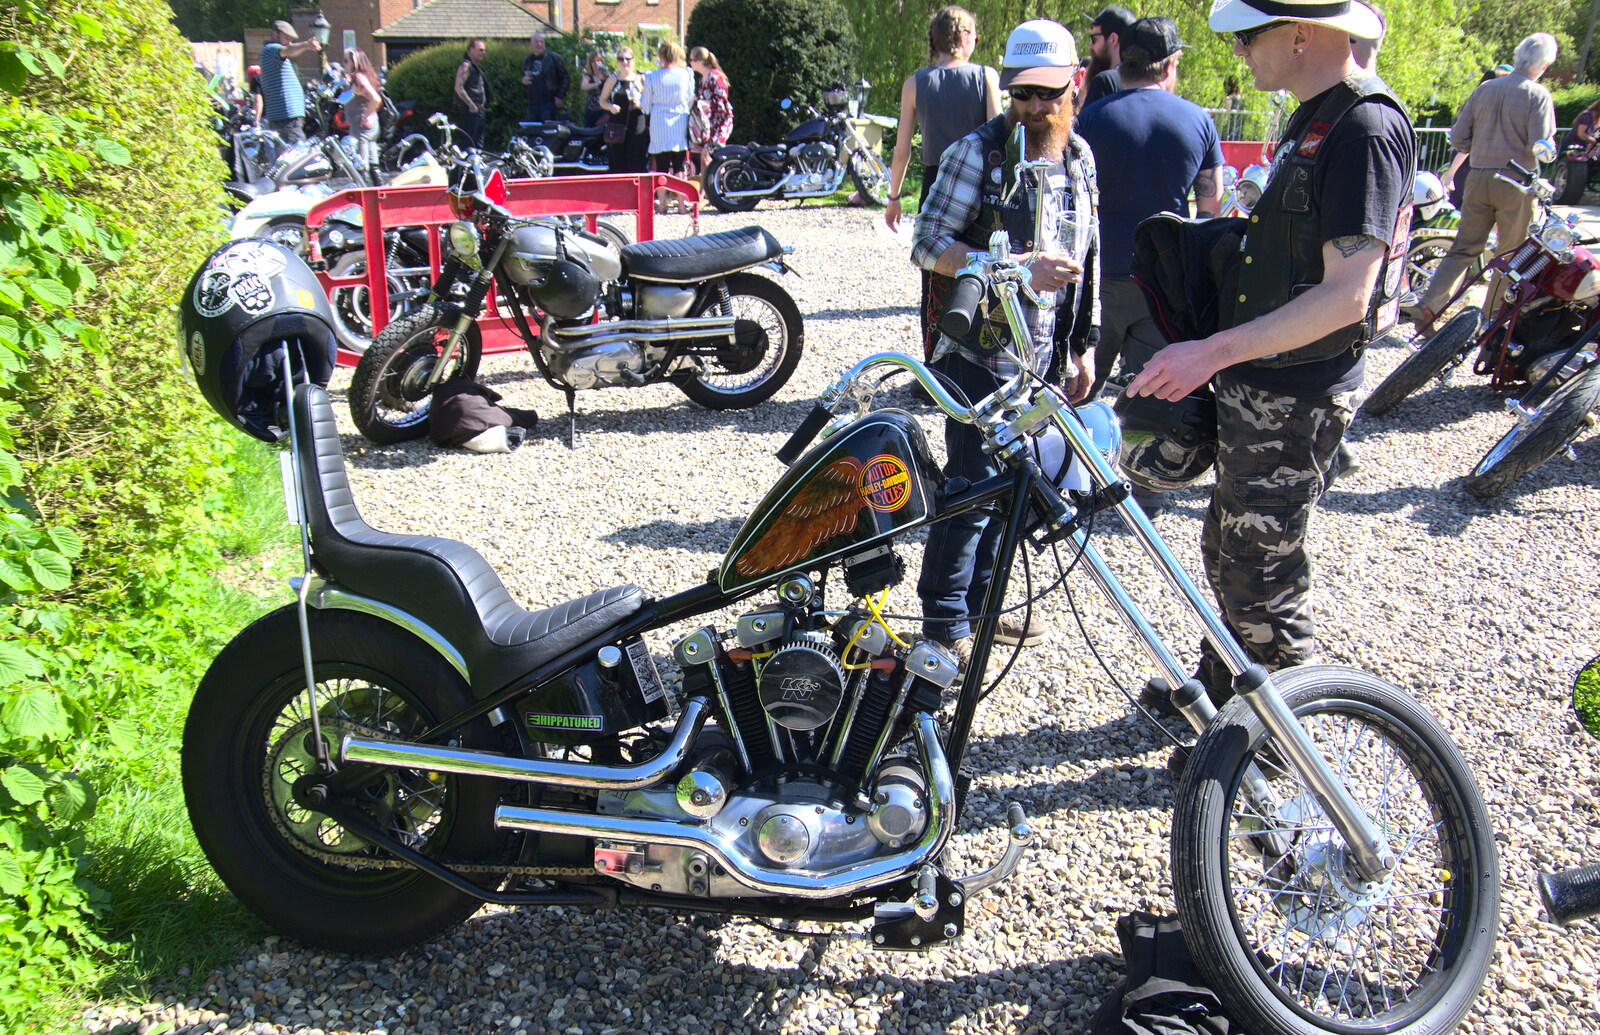 An American chopper from Beer, Bikes and Bands, Burston Crown, Burston, Norfolk - 6th May 2018